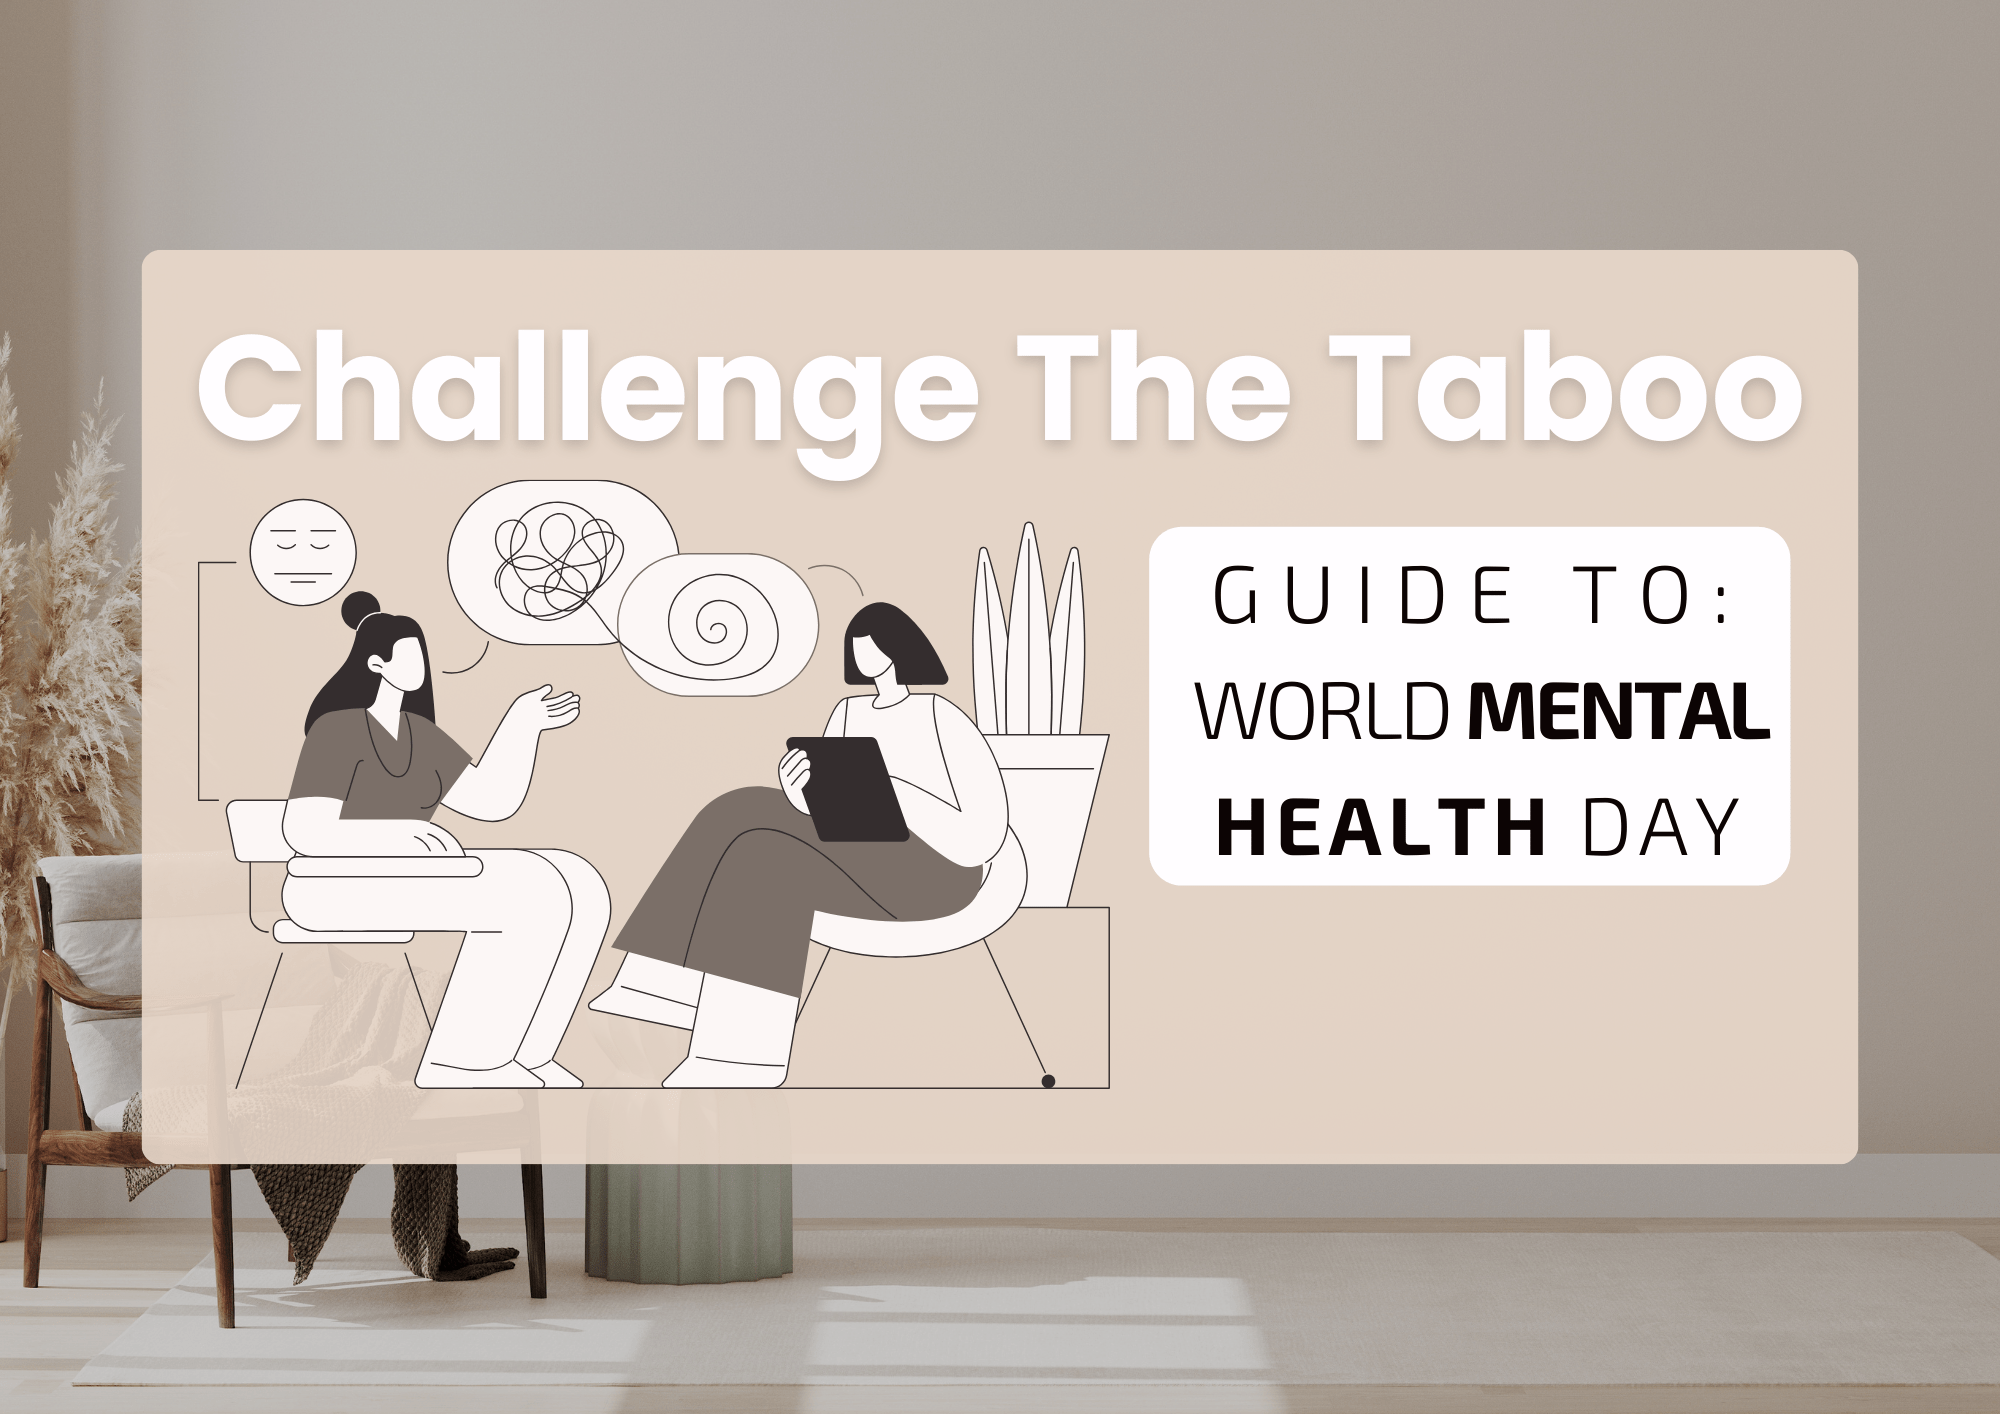 Challenge The Taboo. Guide To World Mental Health Day. Illustration of a woman at her therapist.